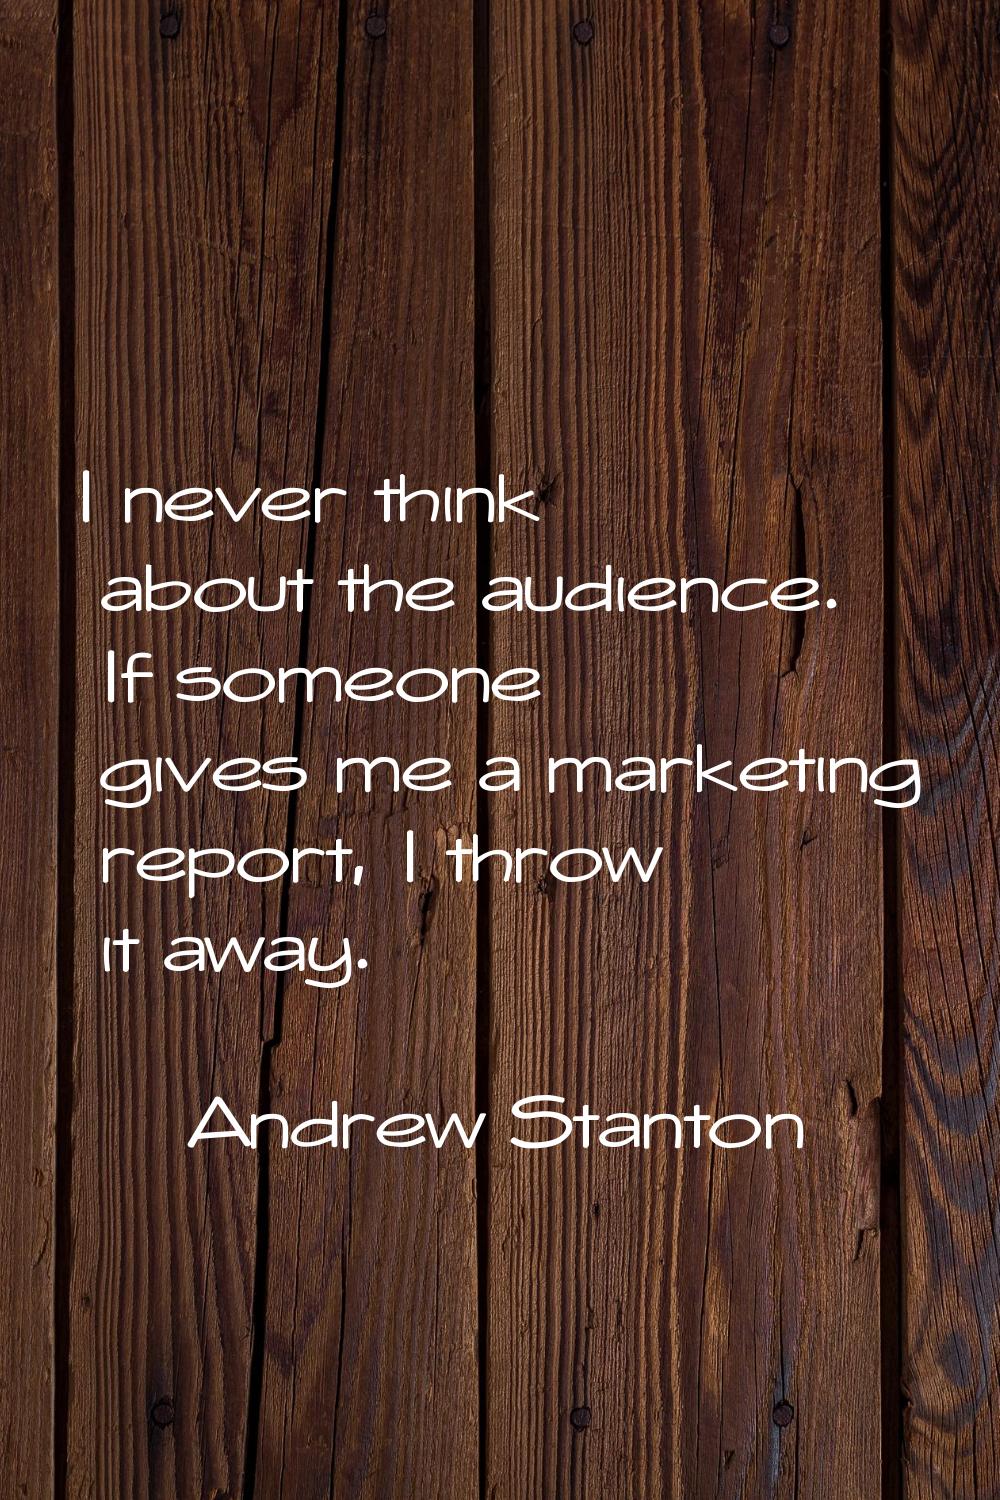 I never think about the audience. If someone gives me a marketing report, I throw it away.